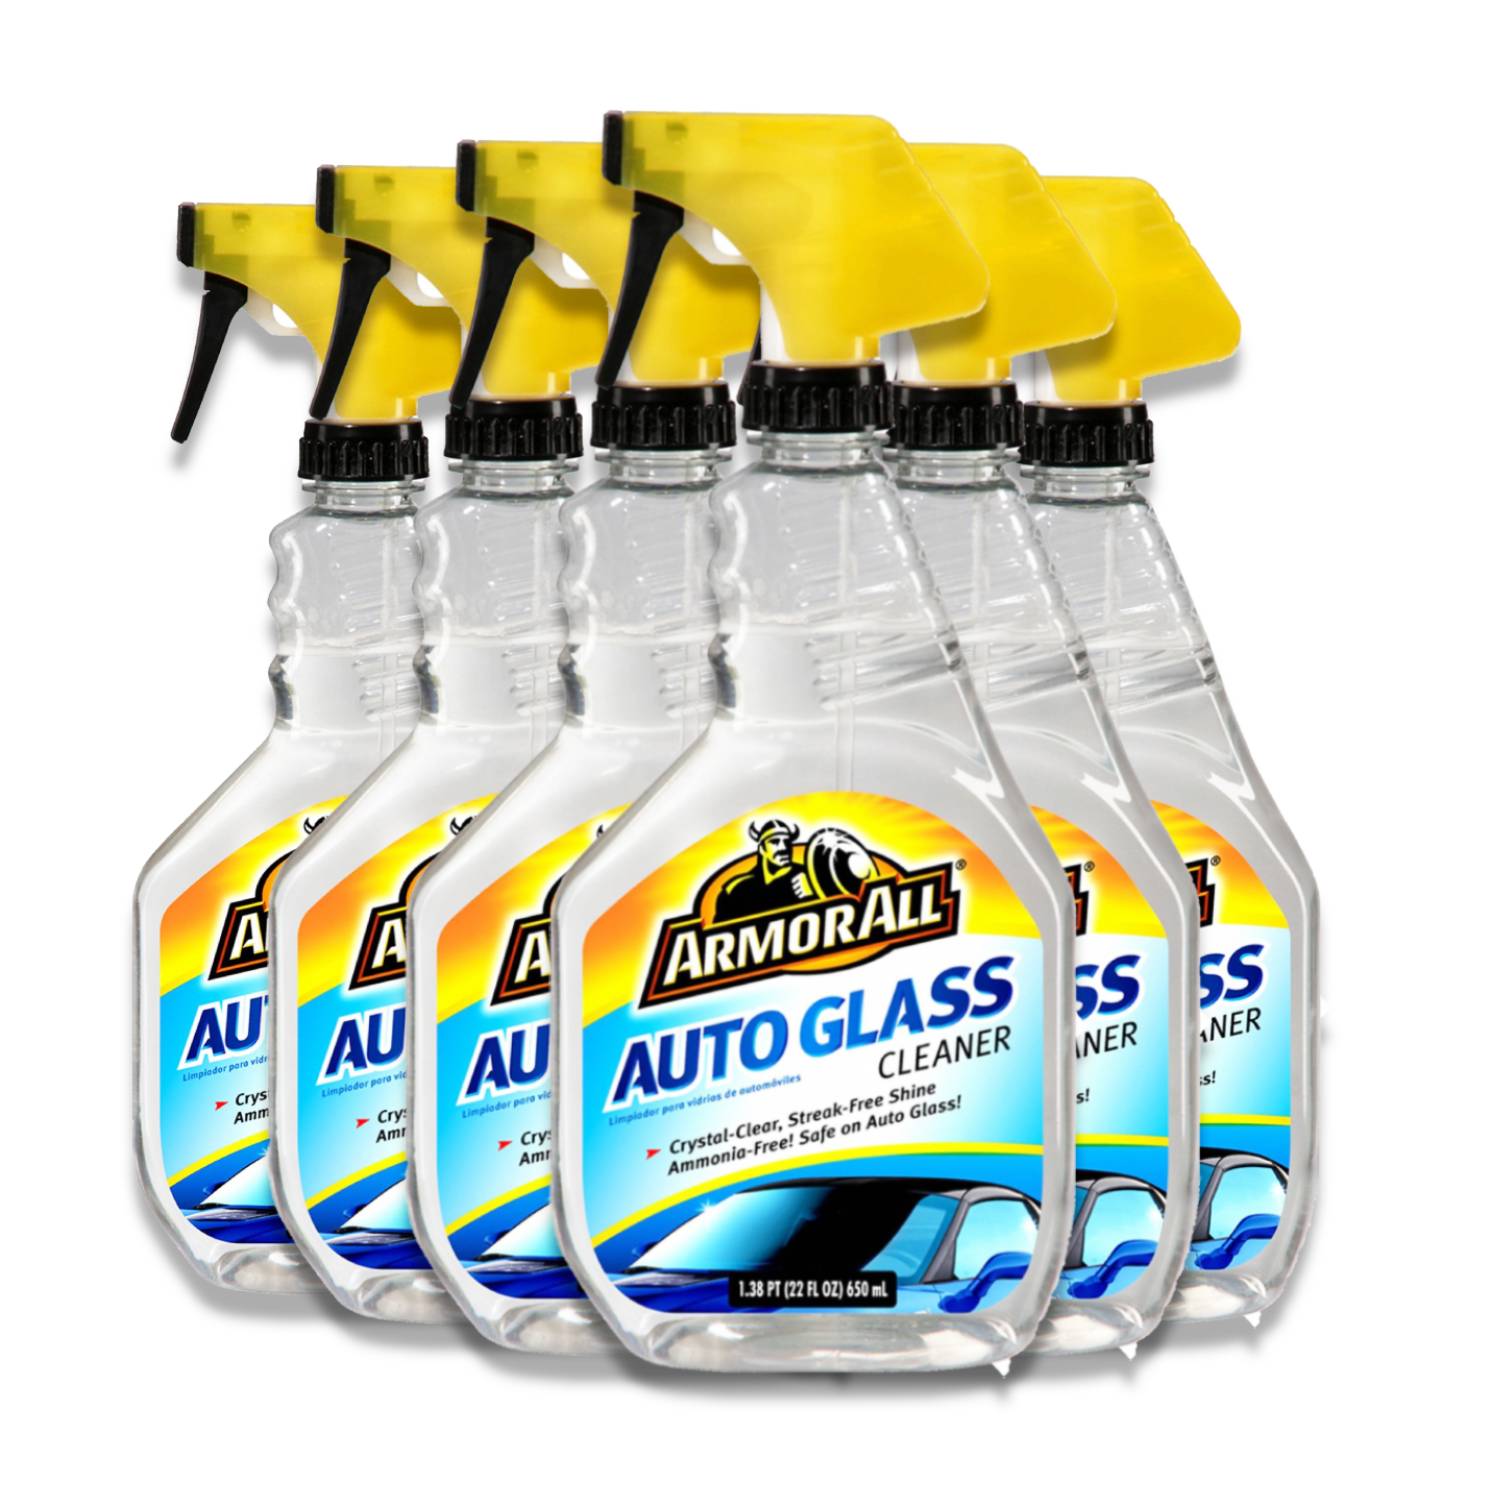 Armor All Auto Glass Cleaner - 22 fl. oz. ea. - 6 Pack